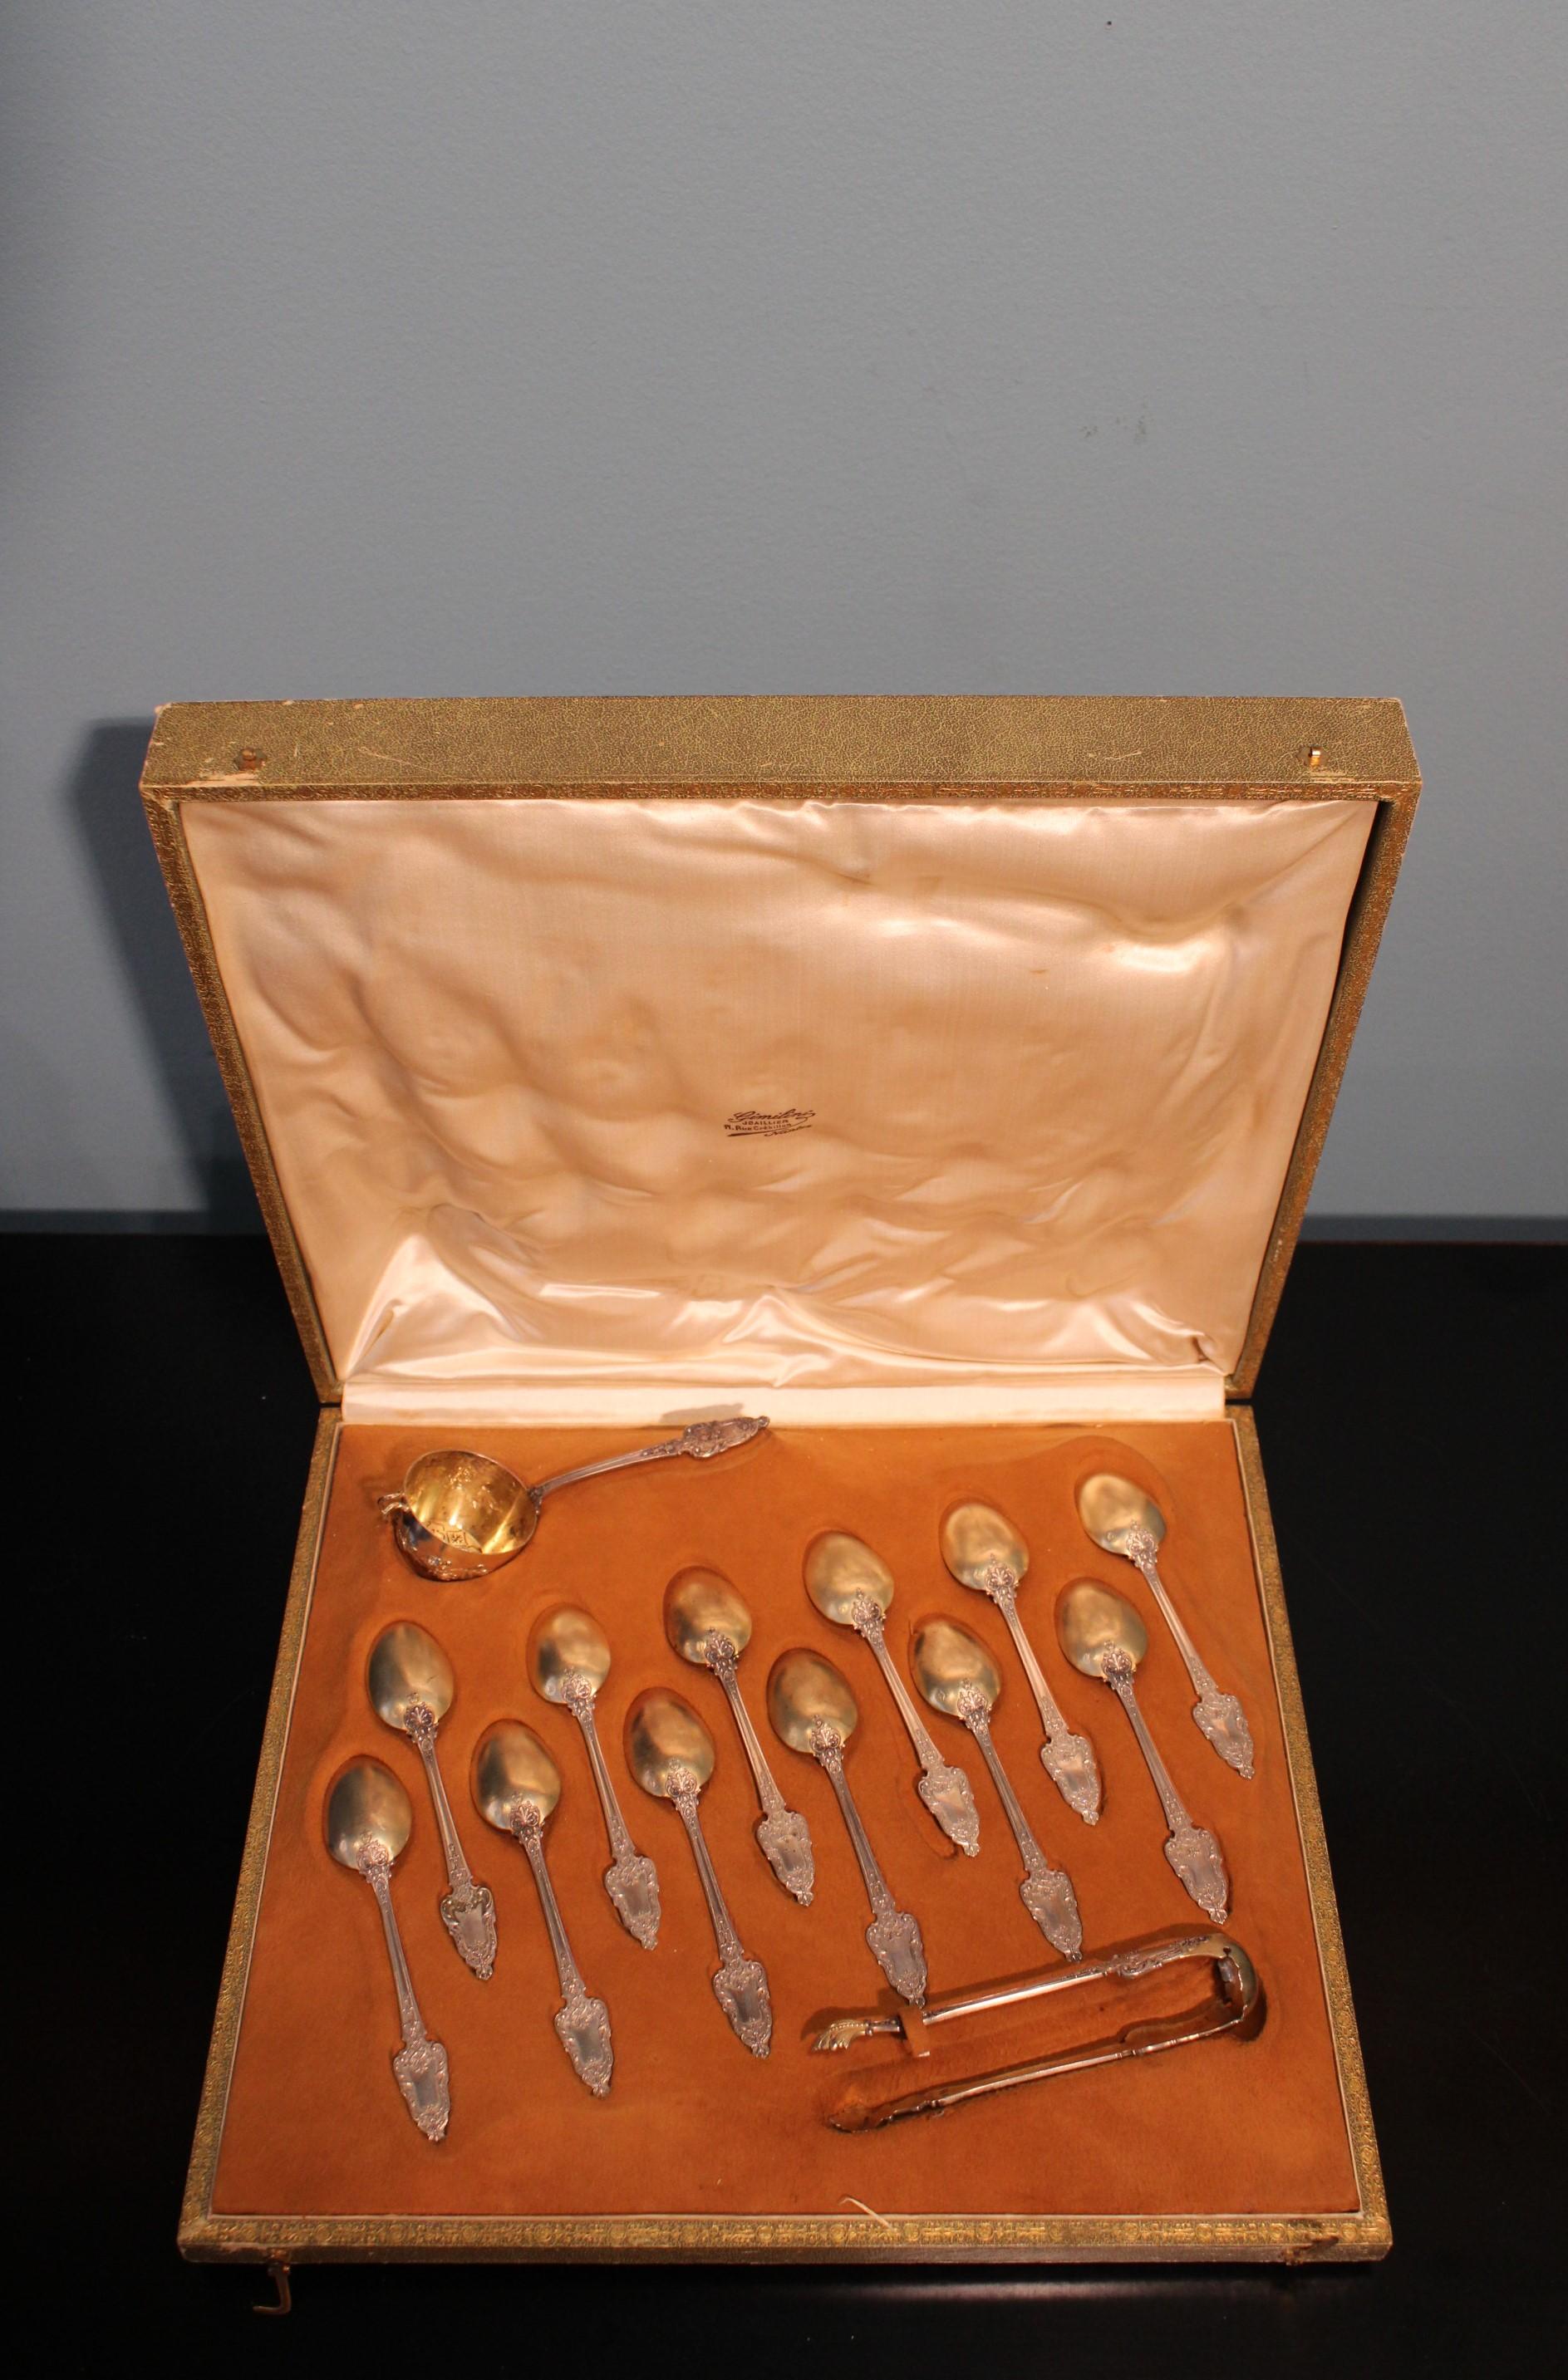 Silverware box composed of silvert-gilt spoons.
Hallmark Minerva. 

Box dimensions : 34.5 x 31 x 5.5 cm
Dimensions of a spoons : 13 x 2.5 x 1 cm.

Weight : 355 g